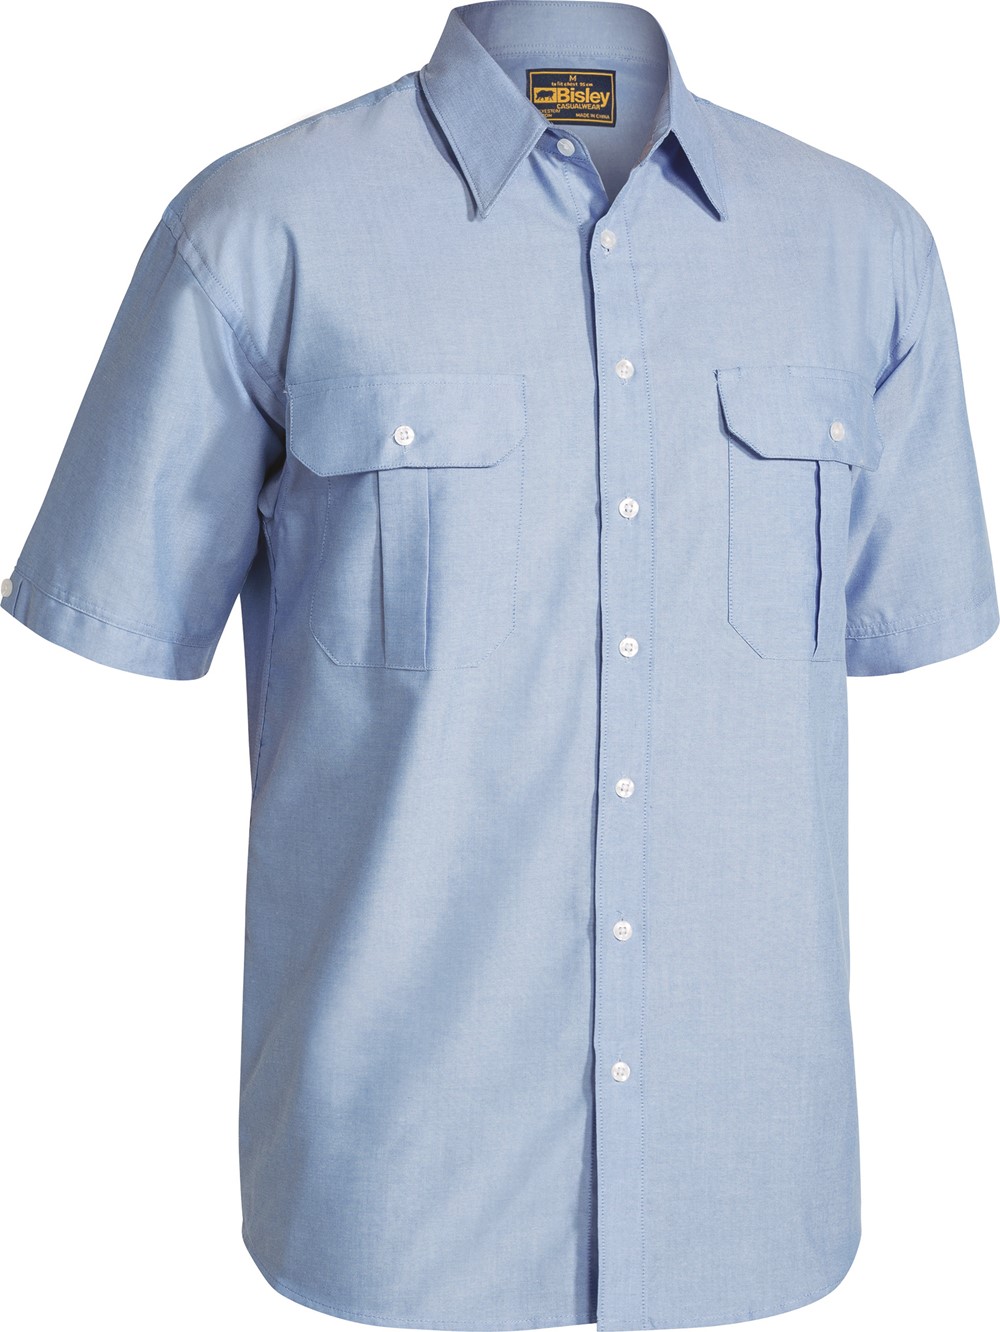 SHIRT OXFORD S/S BLUE SIZE LARGE 